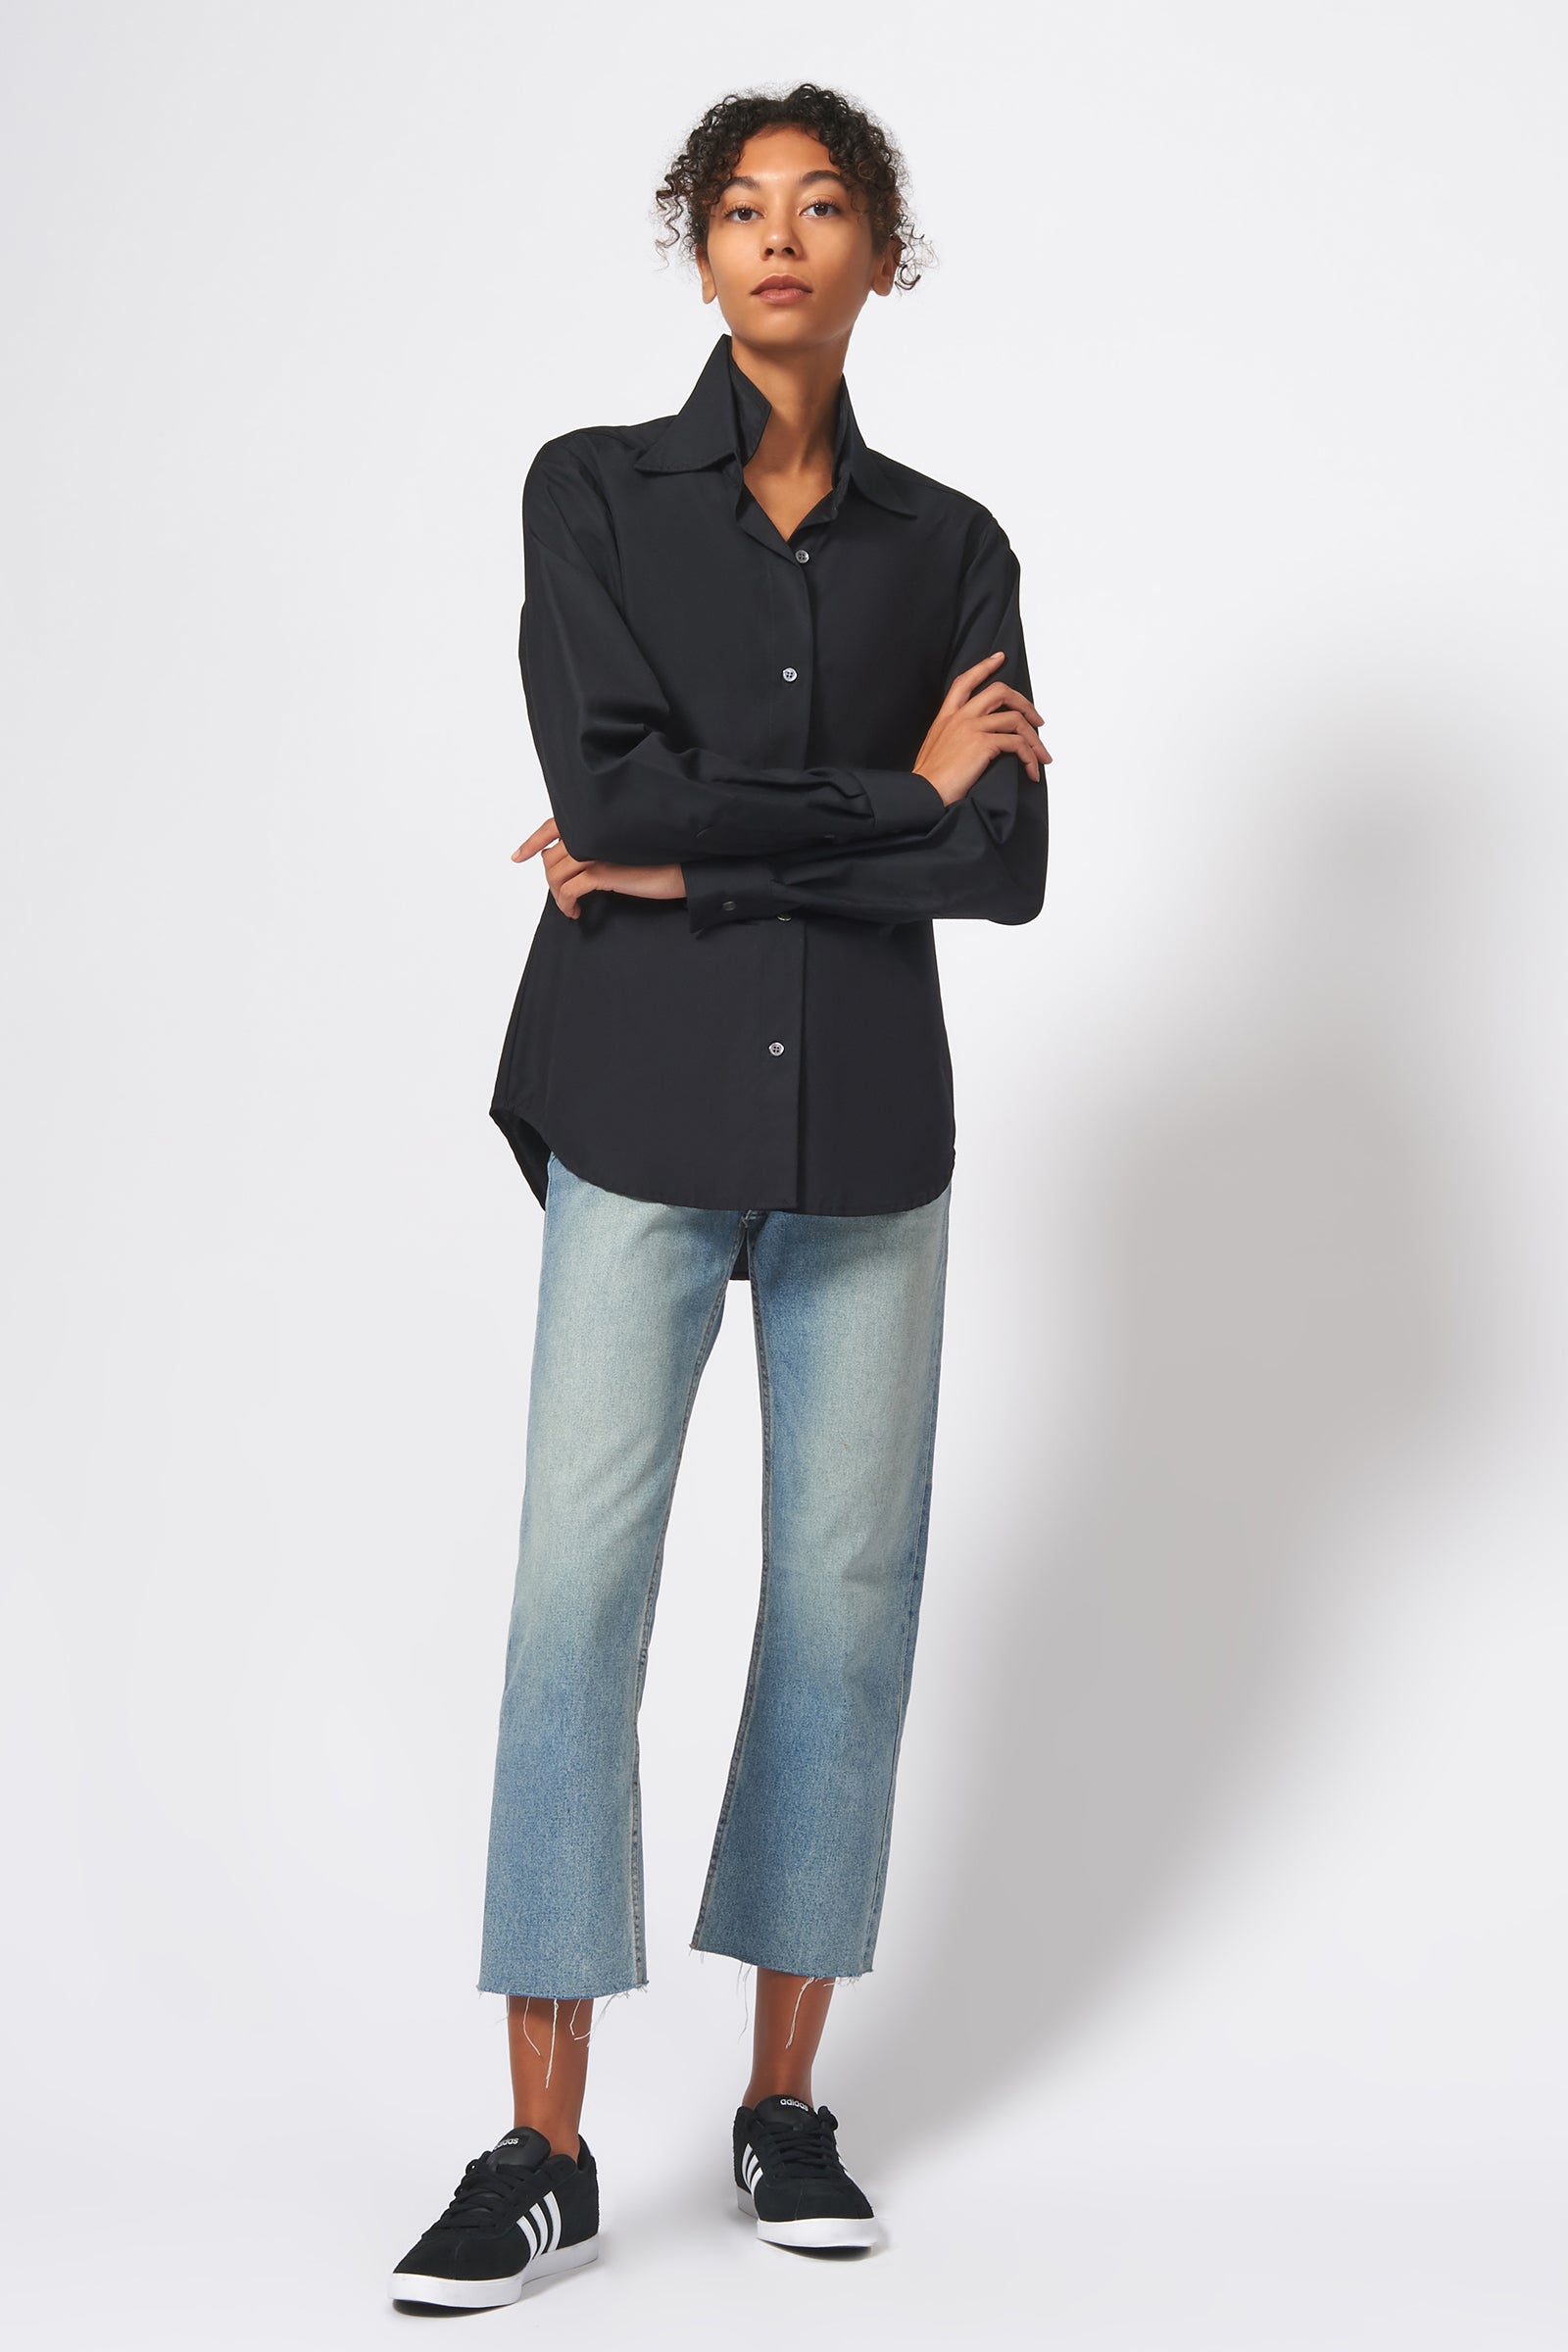 Kal Rieman Double Collar Shirt in Black Ottoman on Model Full Front View